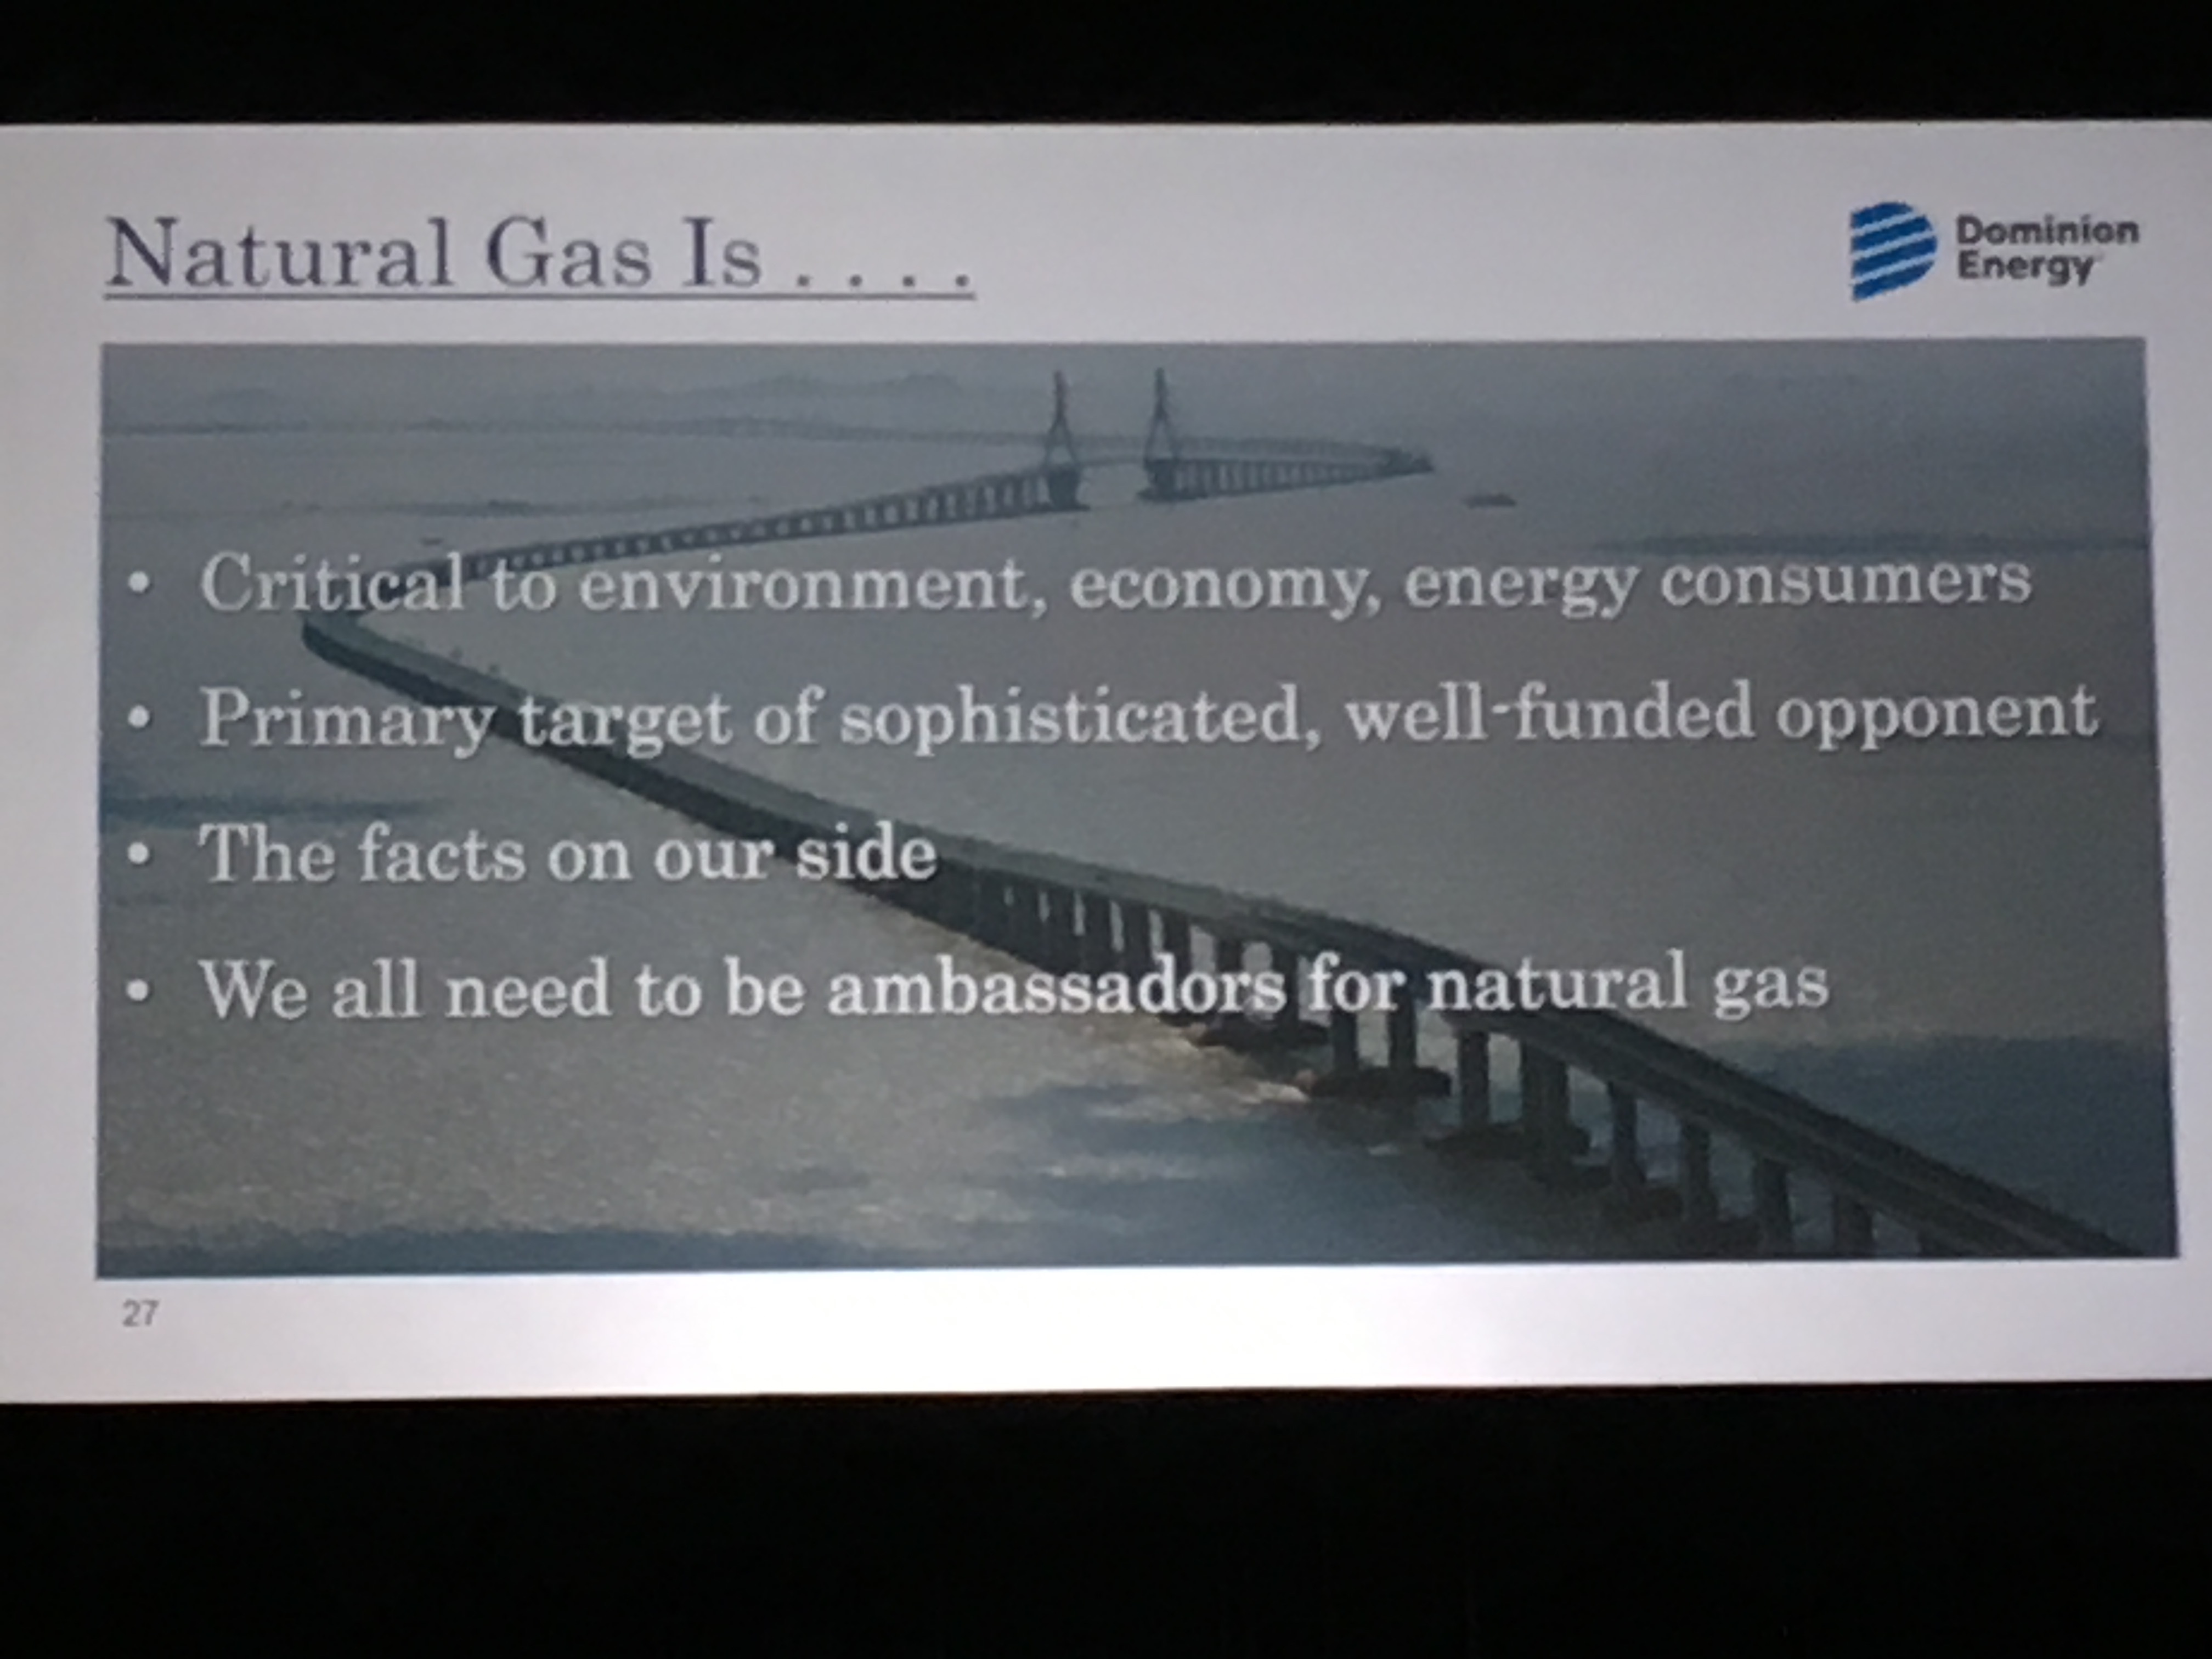 Slide from Dominion Energy on natural gas talking points